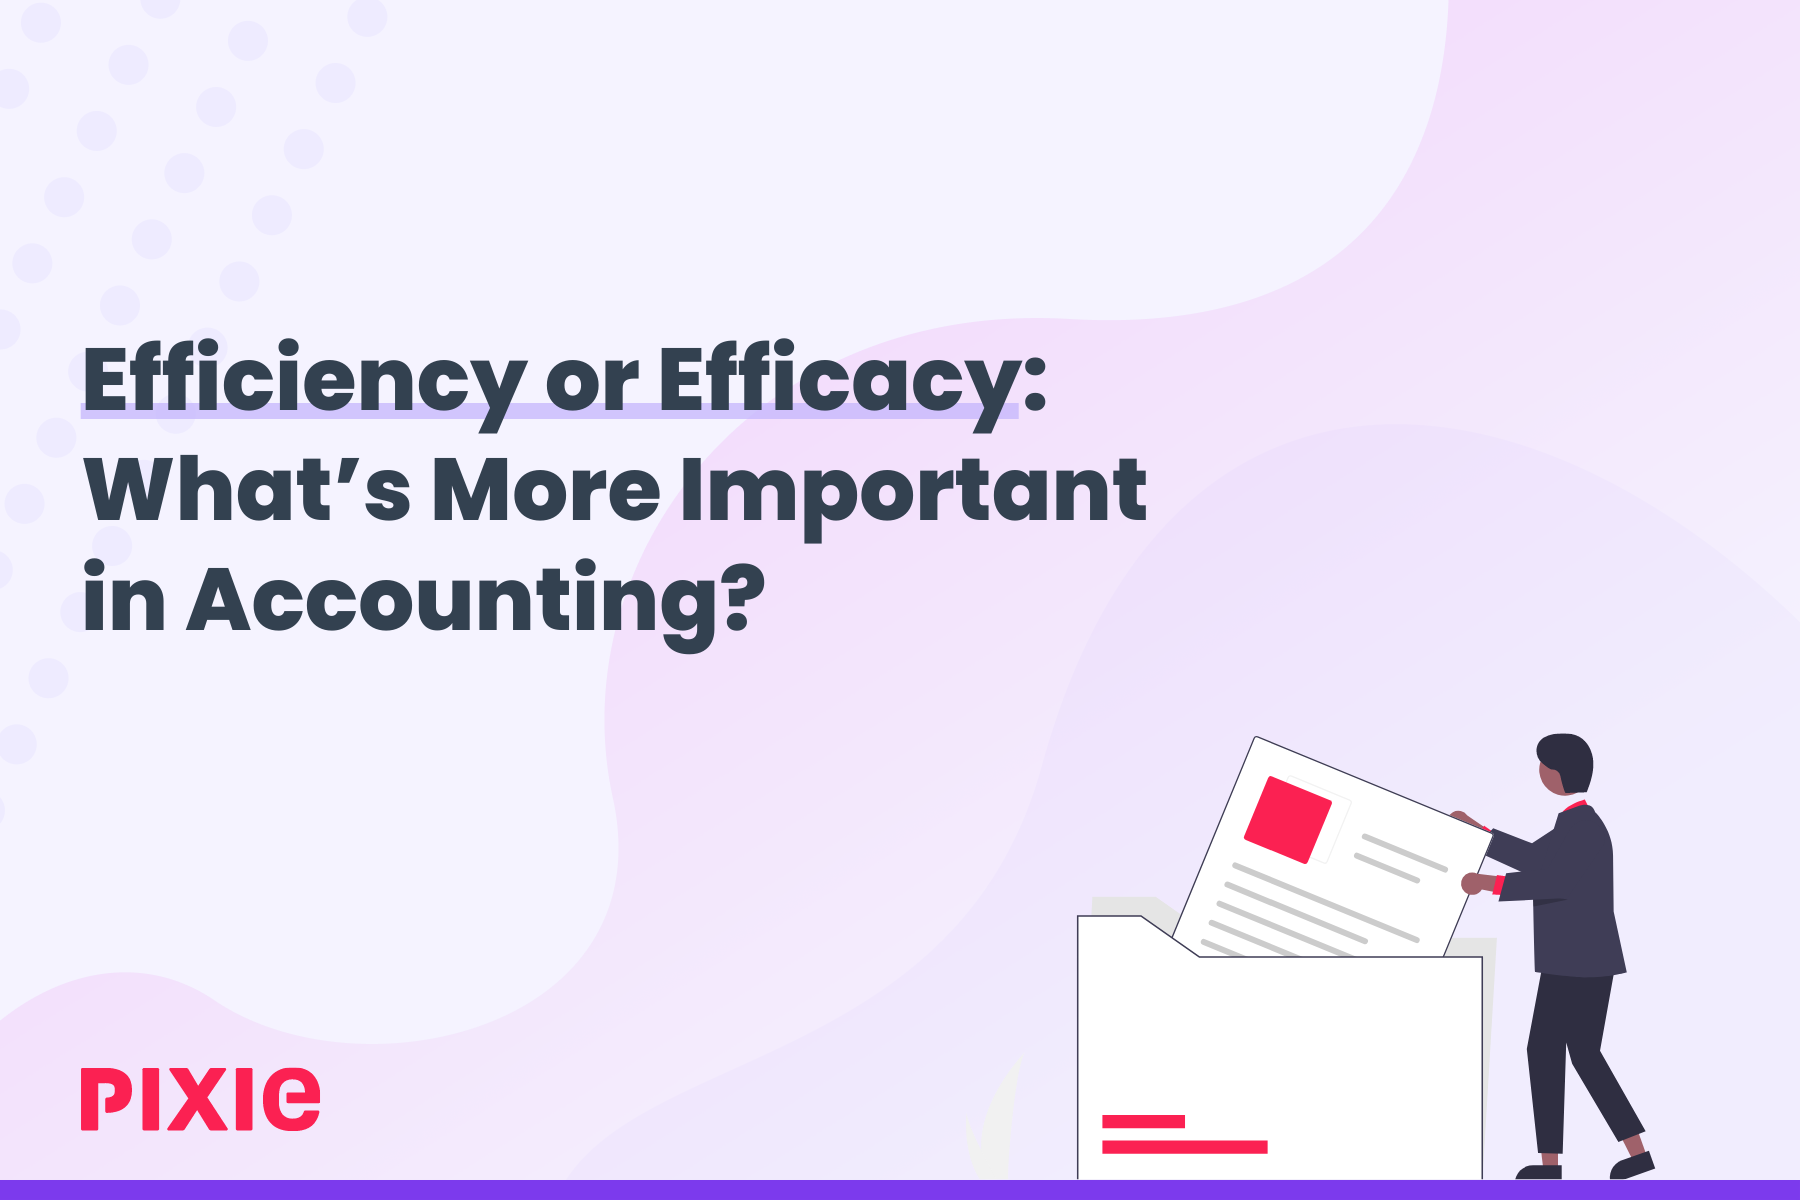 Efficiency or Efficacy: What’s More Important in Accounting?